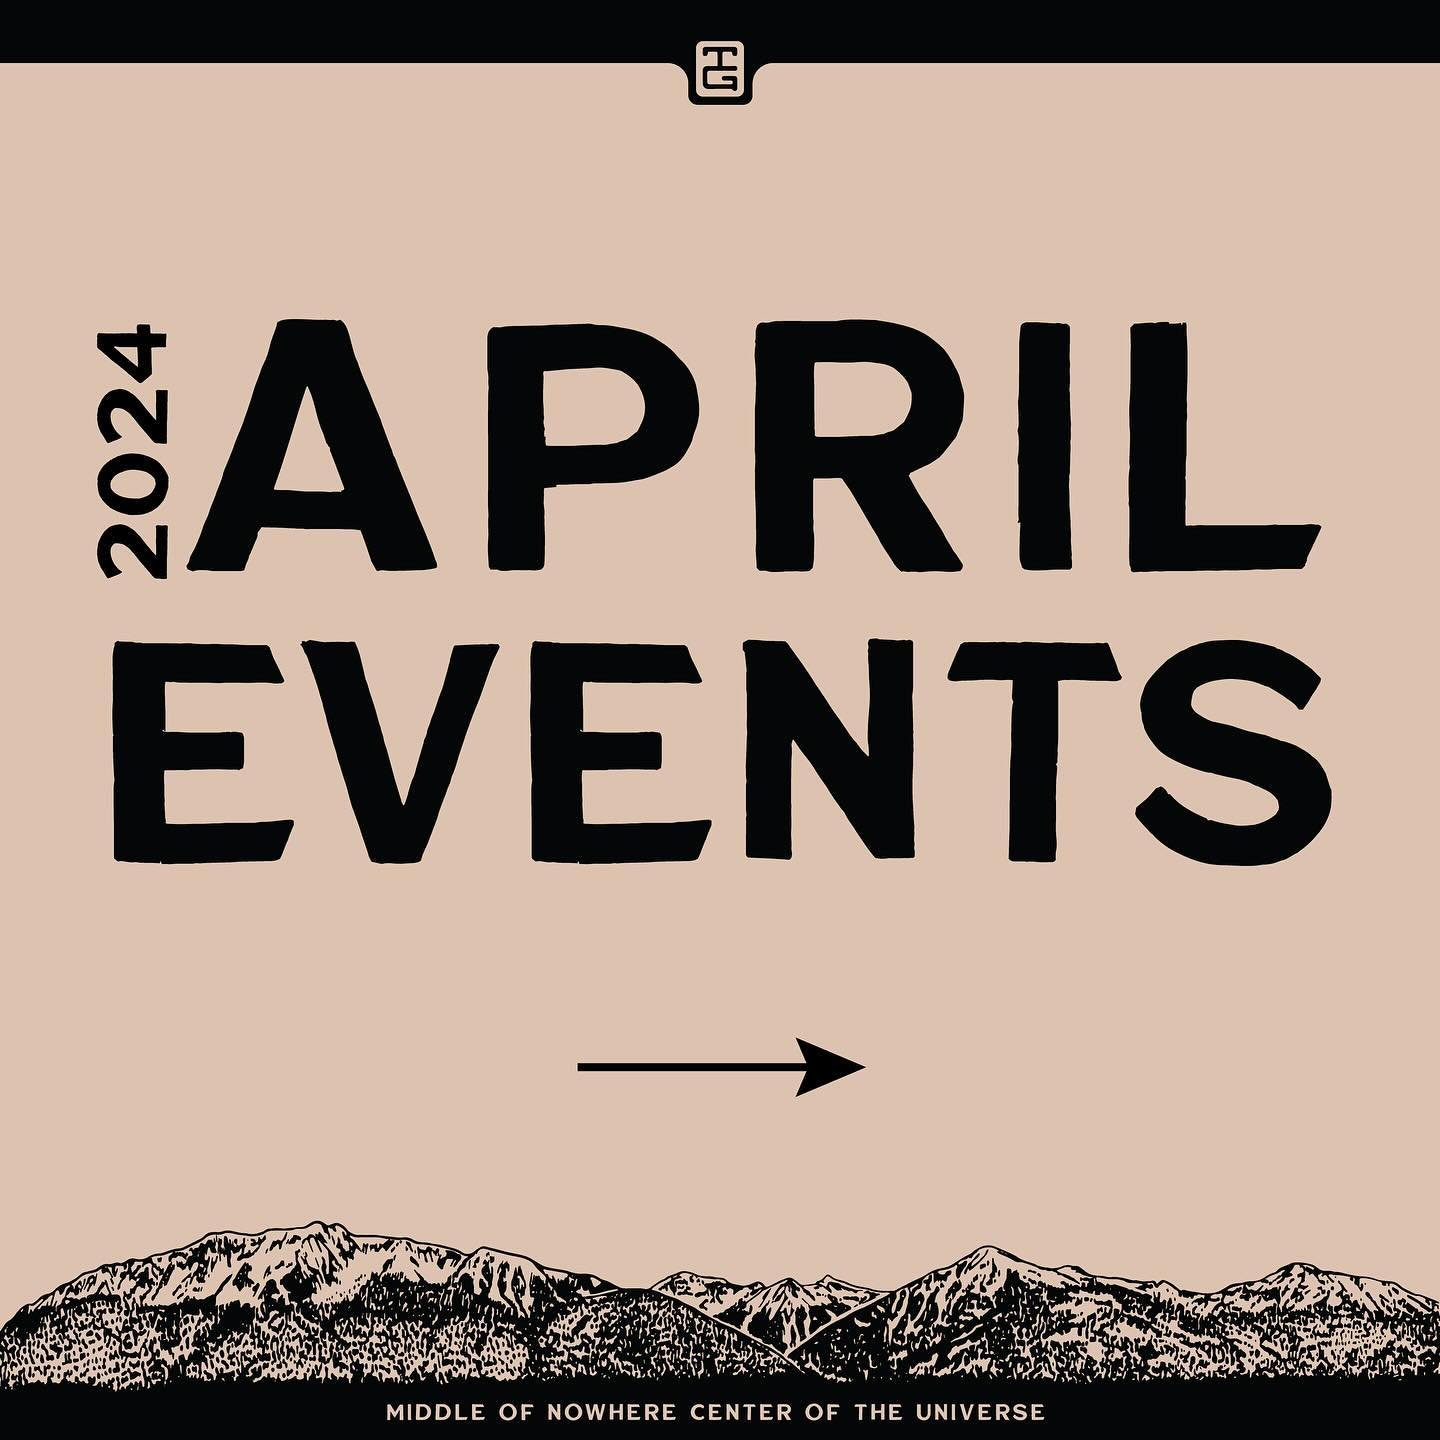 Happy April, friends 📅 Check out our pub schedule for April (better late than never) and the occasional out of town event. 

Some notables:
Trivia Night 4/11 (still a few spots left, sign up at link in bio)
Guest Chef @pier303seafood 4/16
Tap Takeov